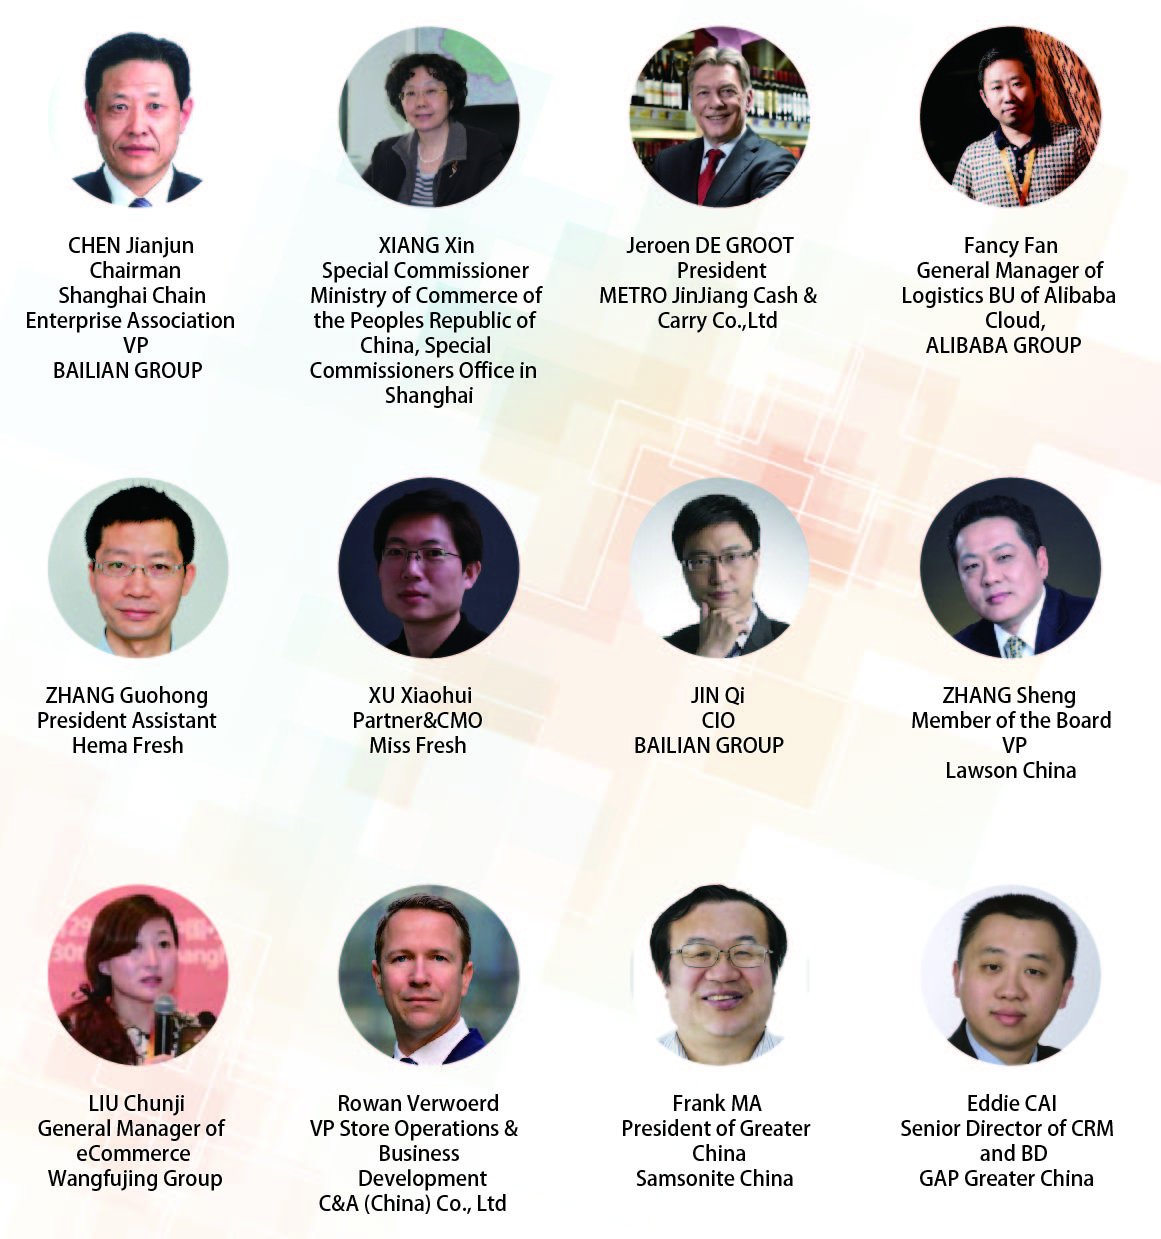 The 13th Shanghai Retail Industry Summit